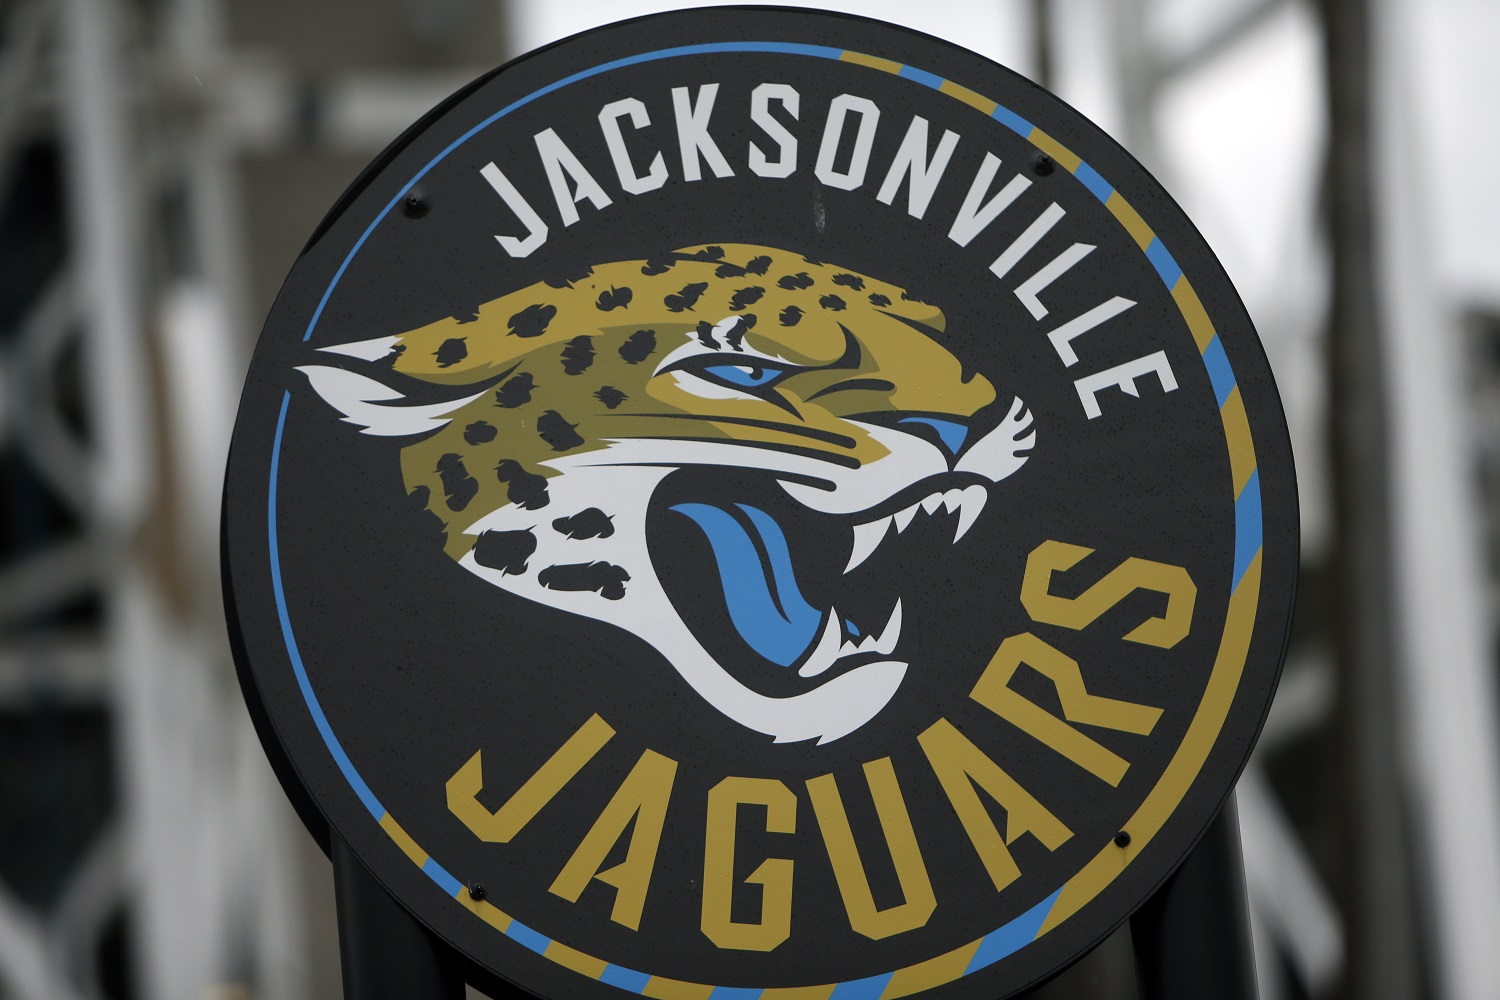 The Jacksonville Jaguars logo on a directional sign at EverBank Field before the first half of an NFL preseason football game between the Jacksonville Jaguars and the Detroit Lions, Friday, Aug. 28, 2015, in Jacksonville, Fla. (AP Photo/Stephen B. Morton)